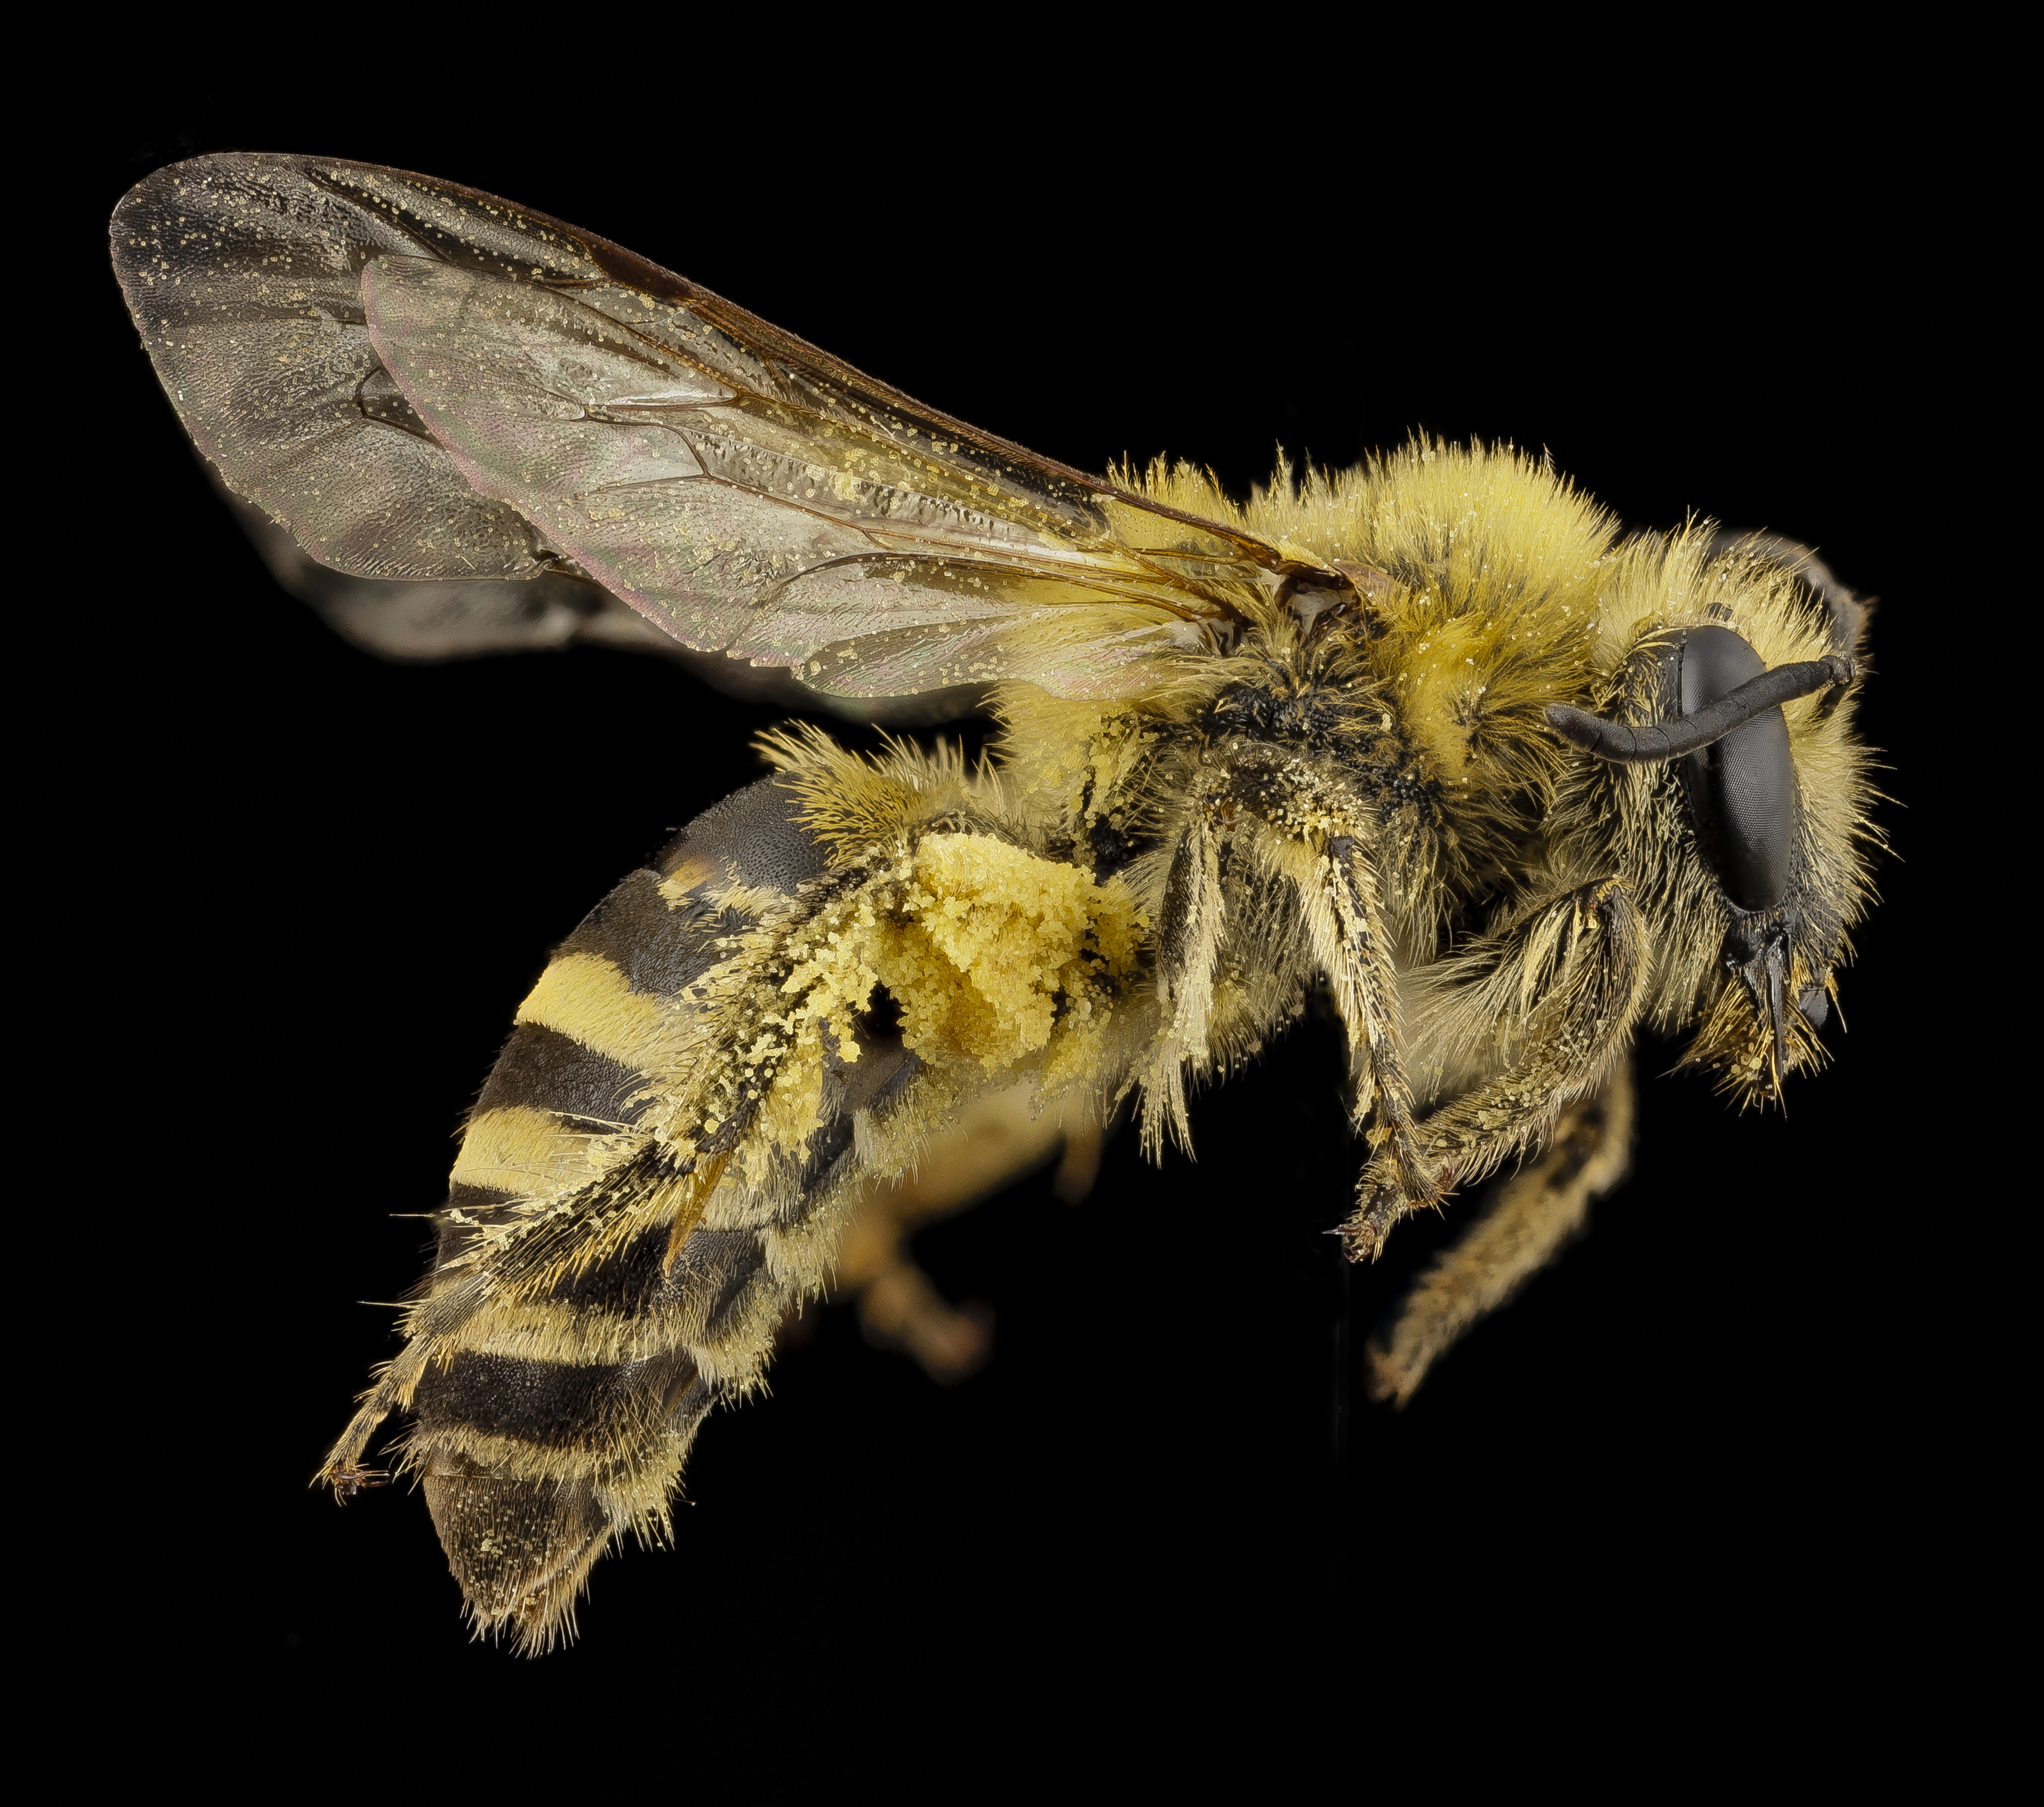 Colletes hederae, f, country unk, side 2014-08-09-18.15.49 ZS PMax (15123328651)